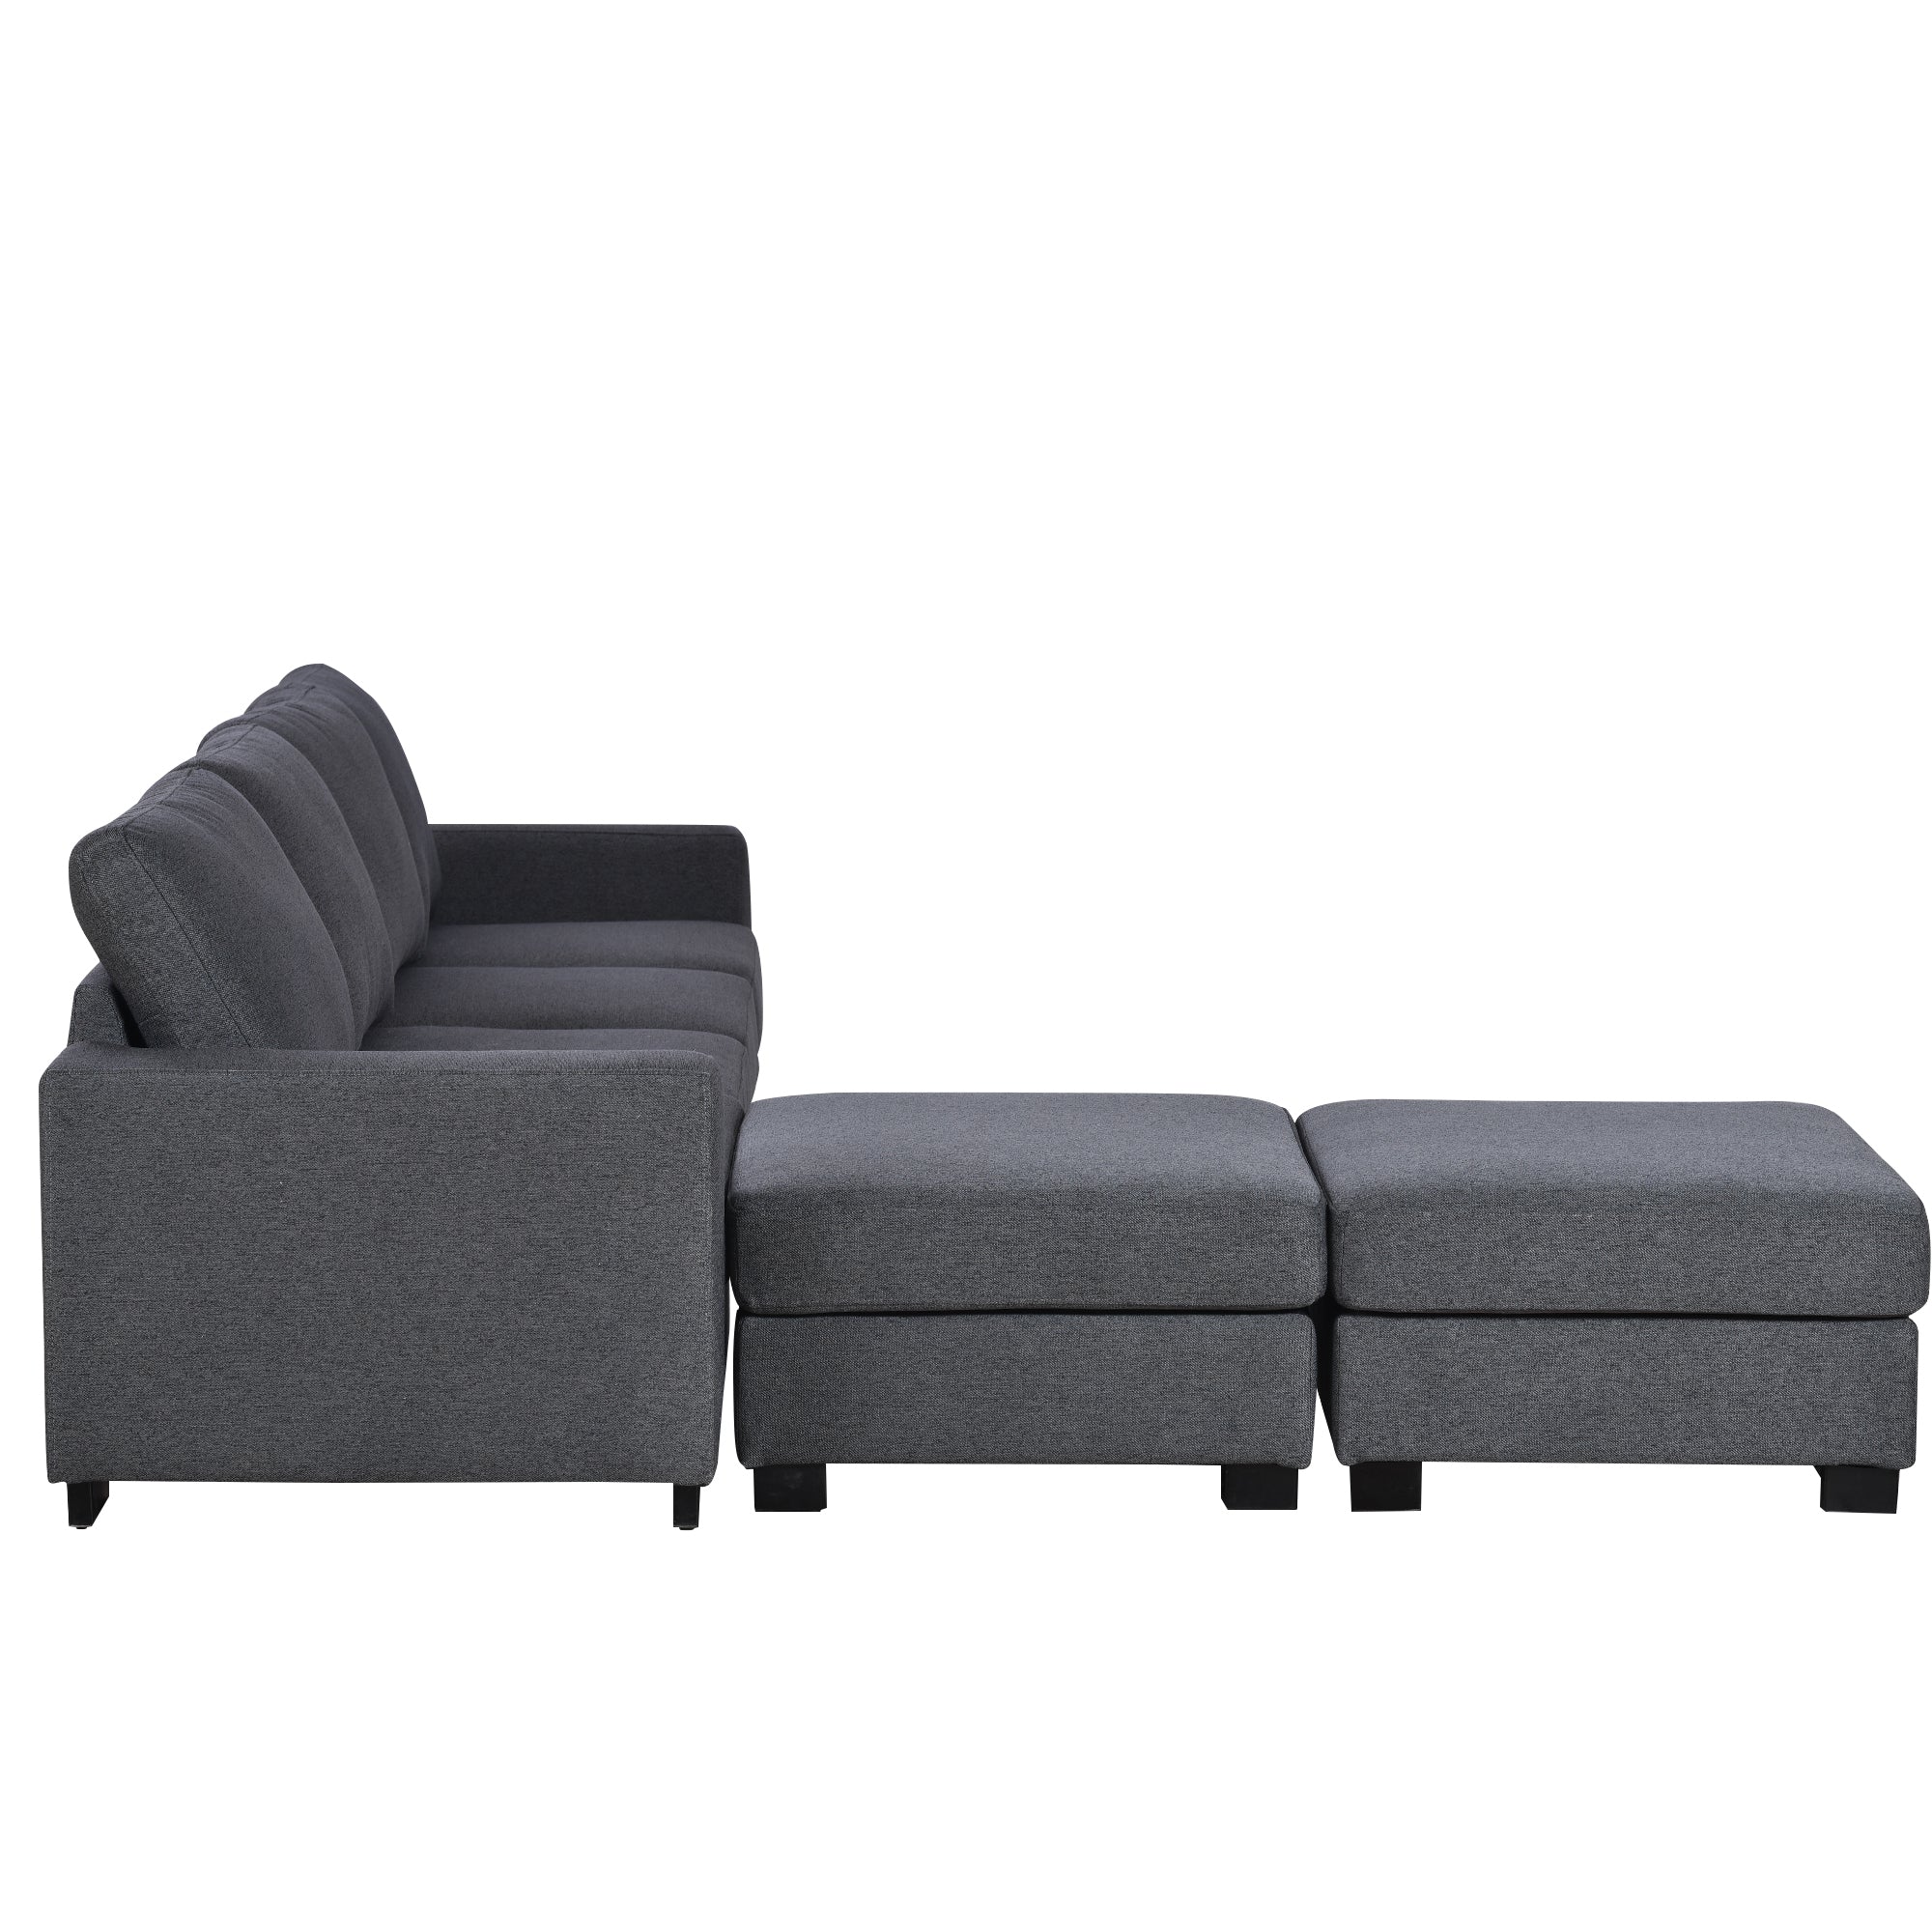 U_STYLE 3 Pieces U shaped Sofa with Removable Ottomans